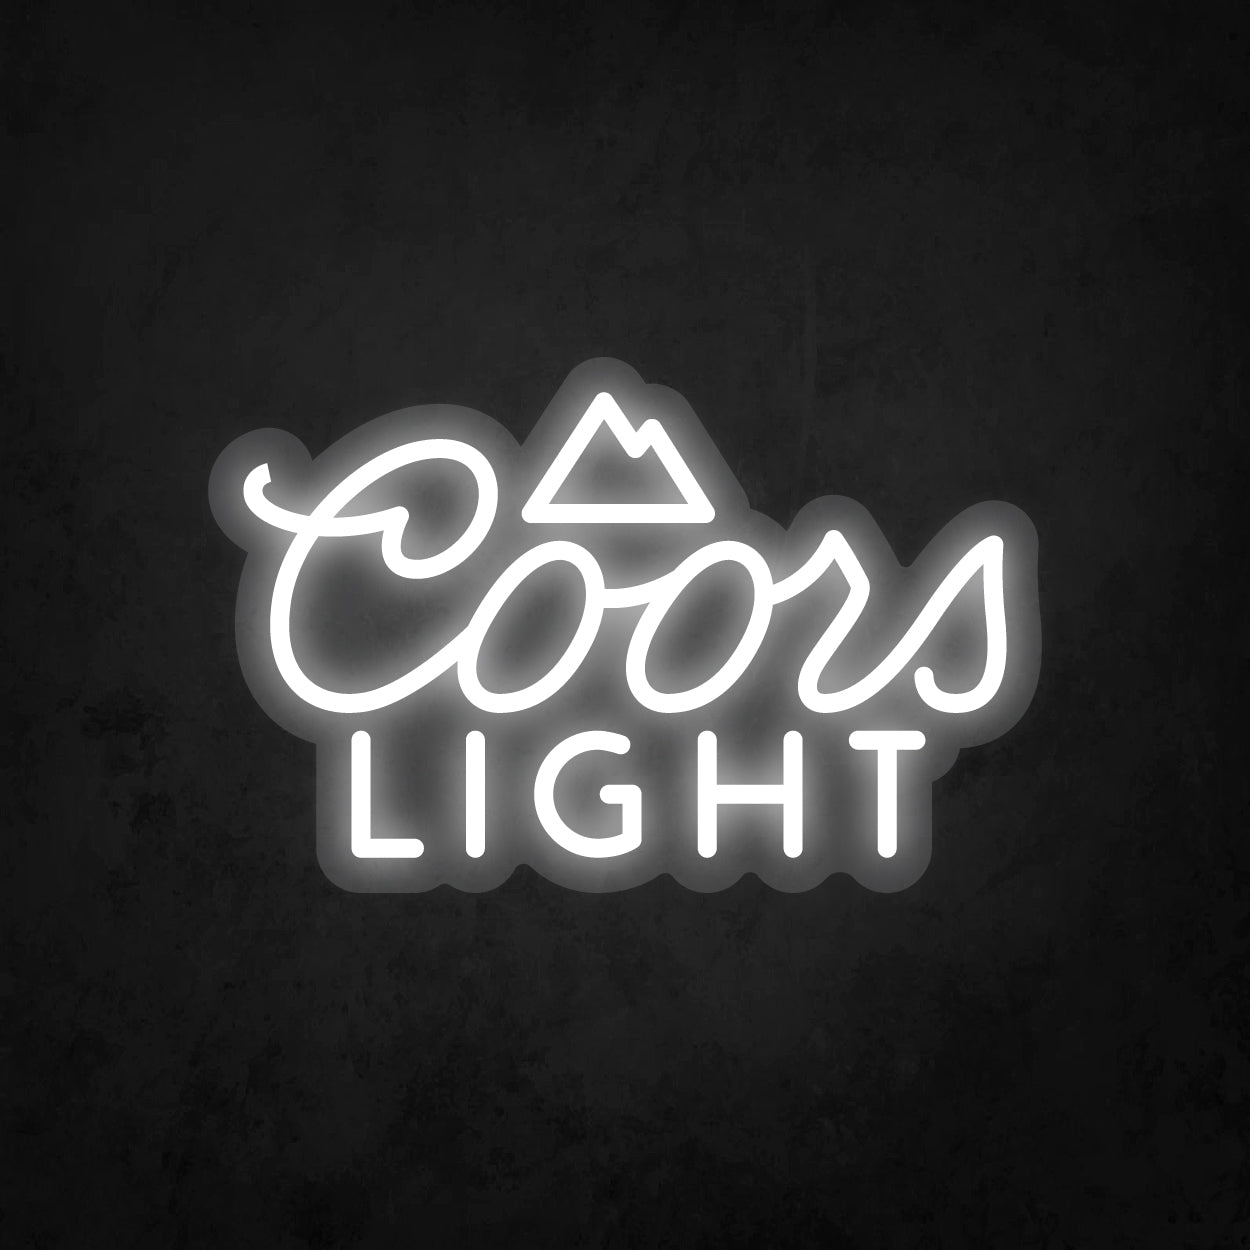 LED Neon Sign - Cools Light